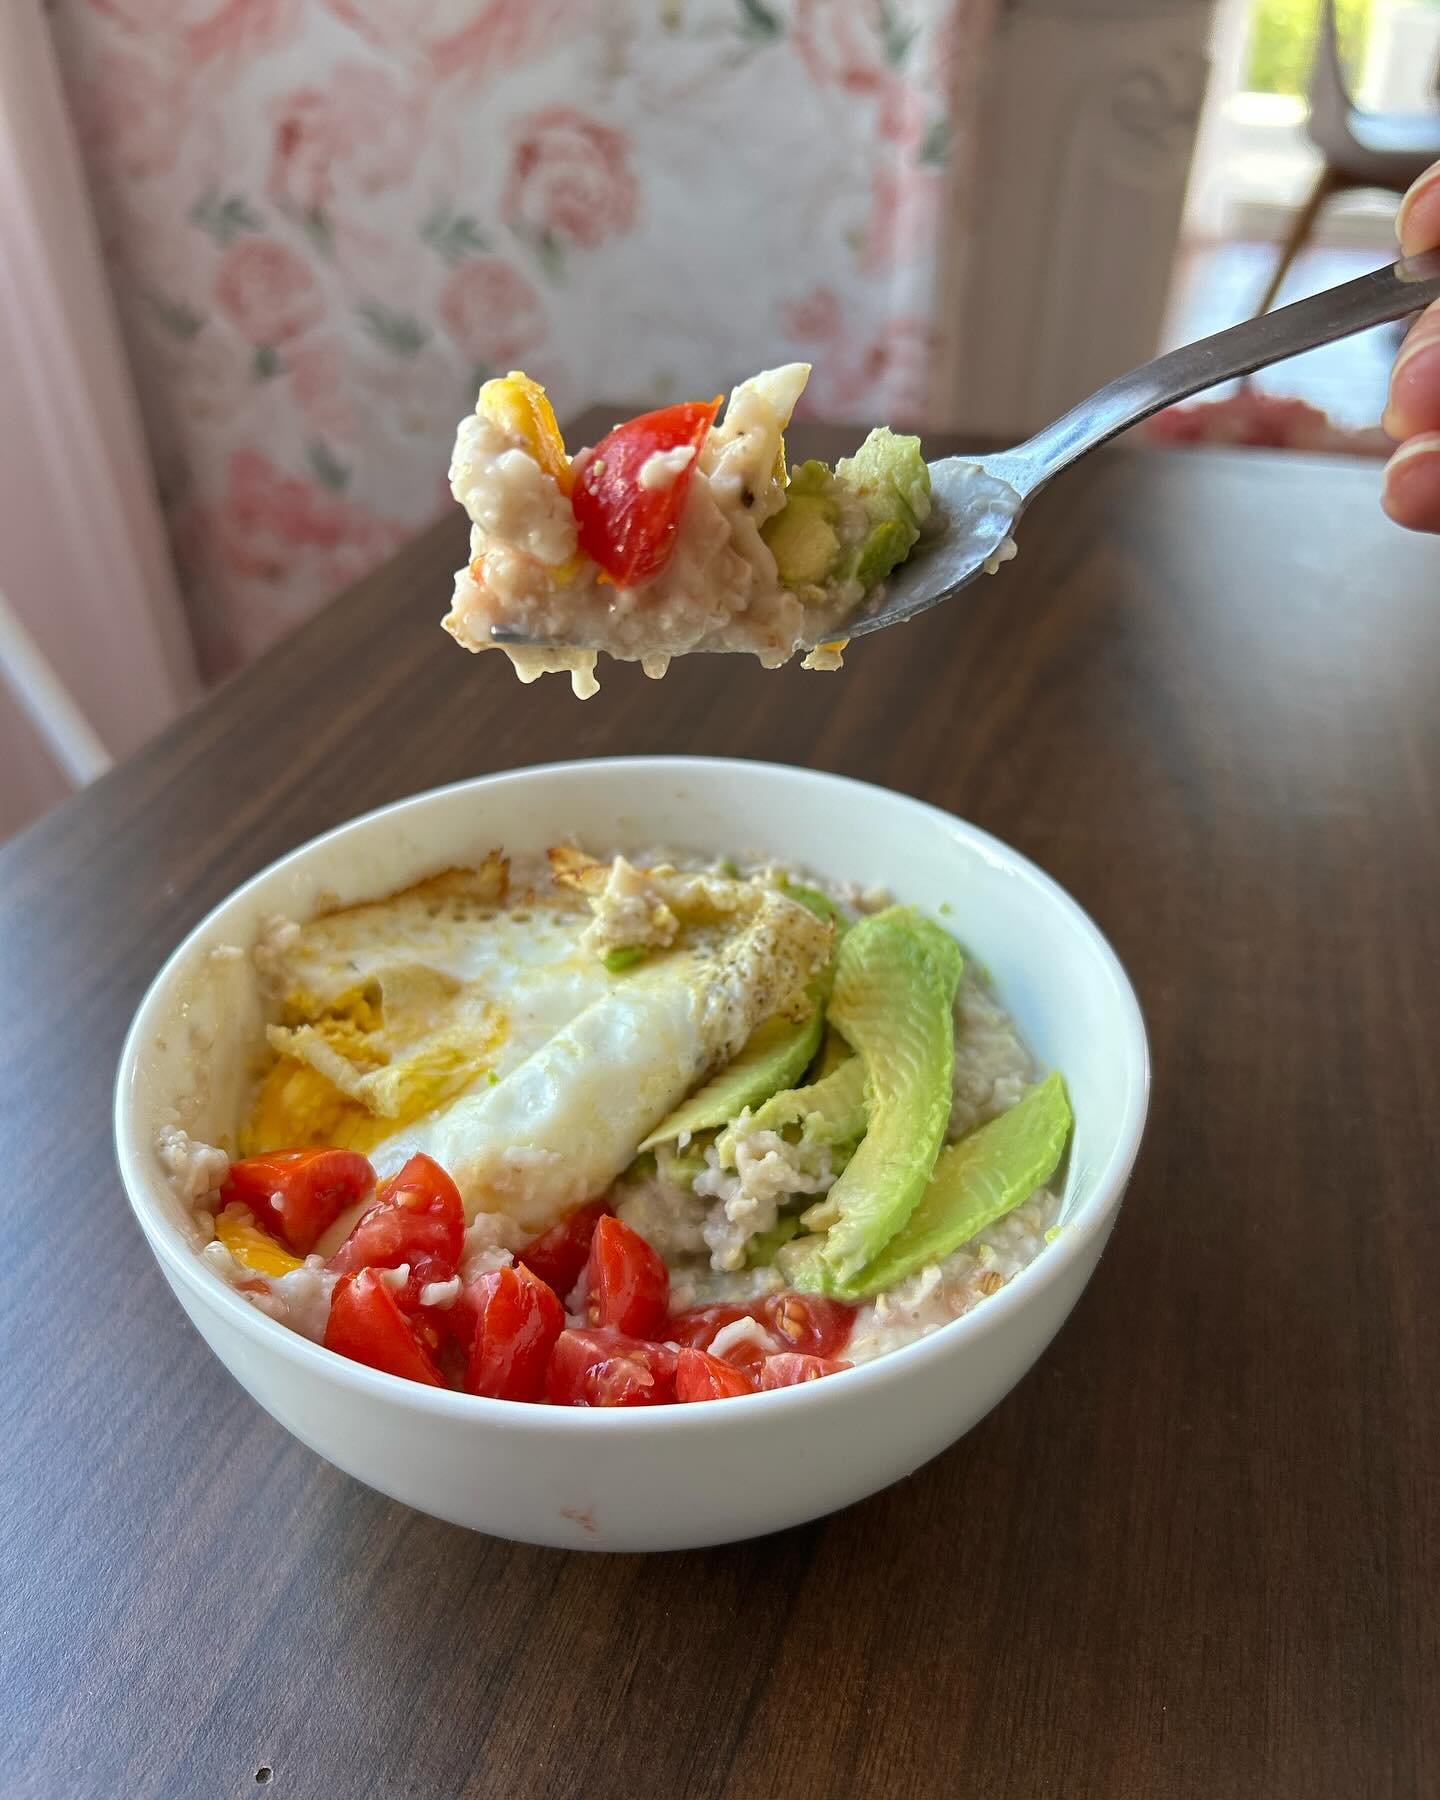 Immediately after I took this photo, and then the bite on that fork, I realized I&rsquo;ve forgotten Sriracha! I remedied that oversight really quickly! Once I got that on, it was ready to eat. Holy moly. I think I tweaked this so that it&rsquo;s pre